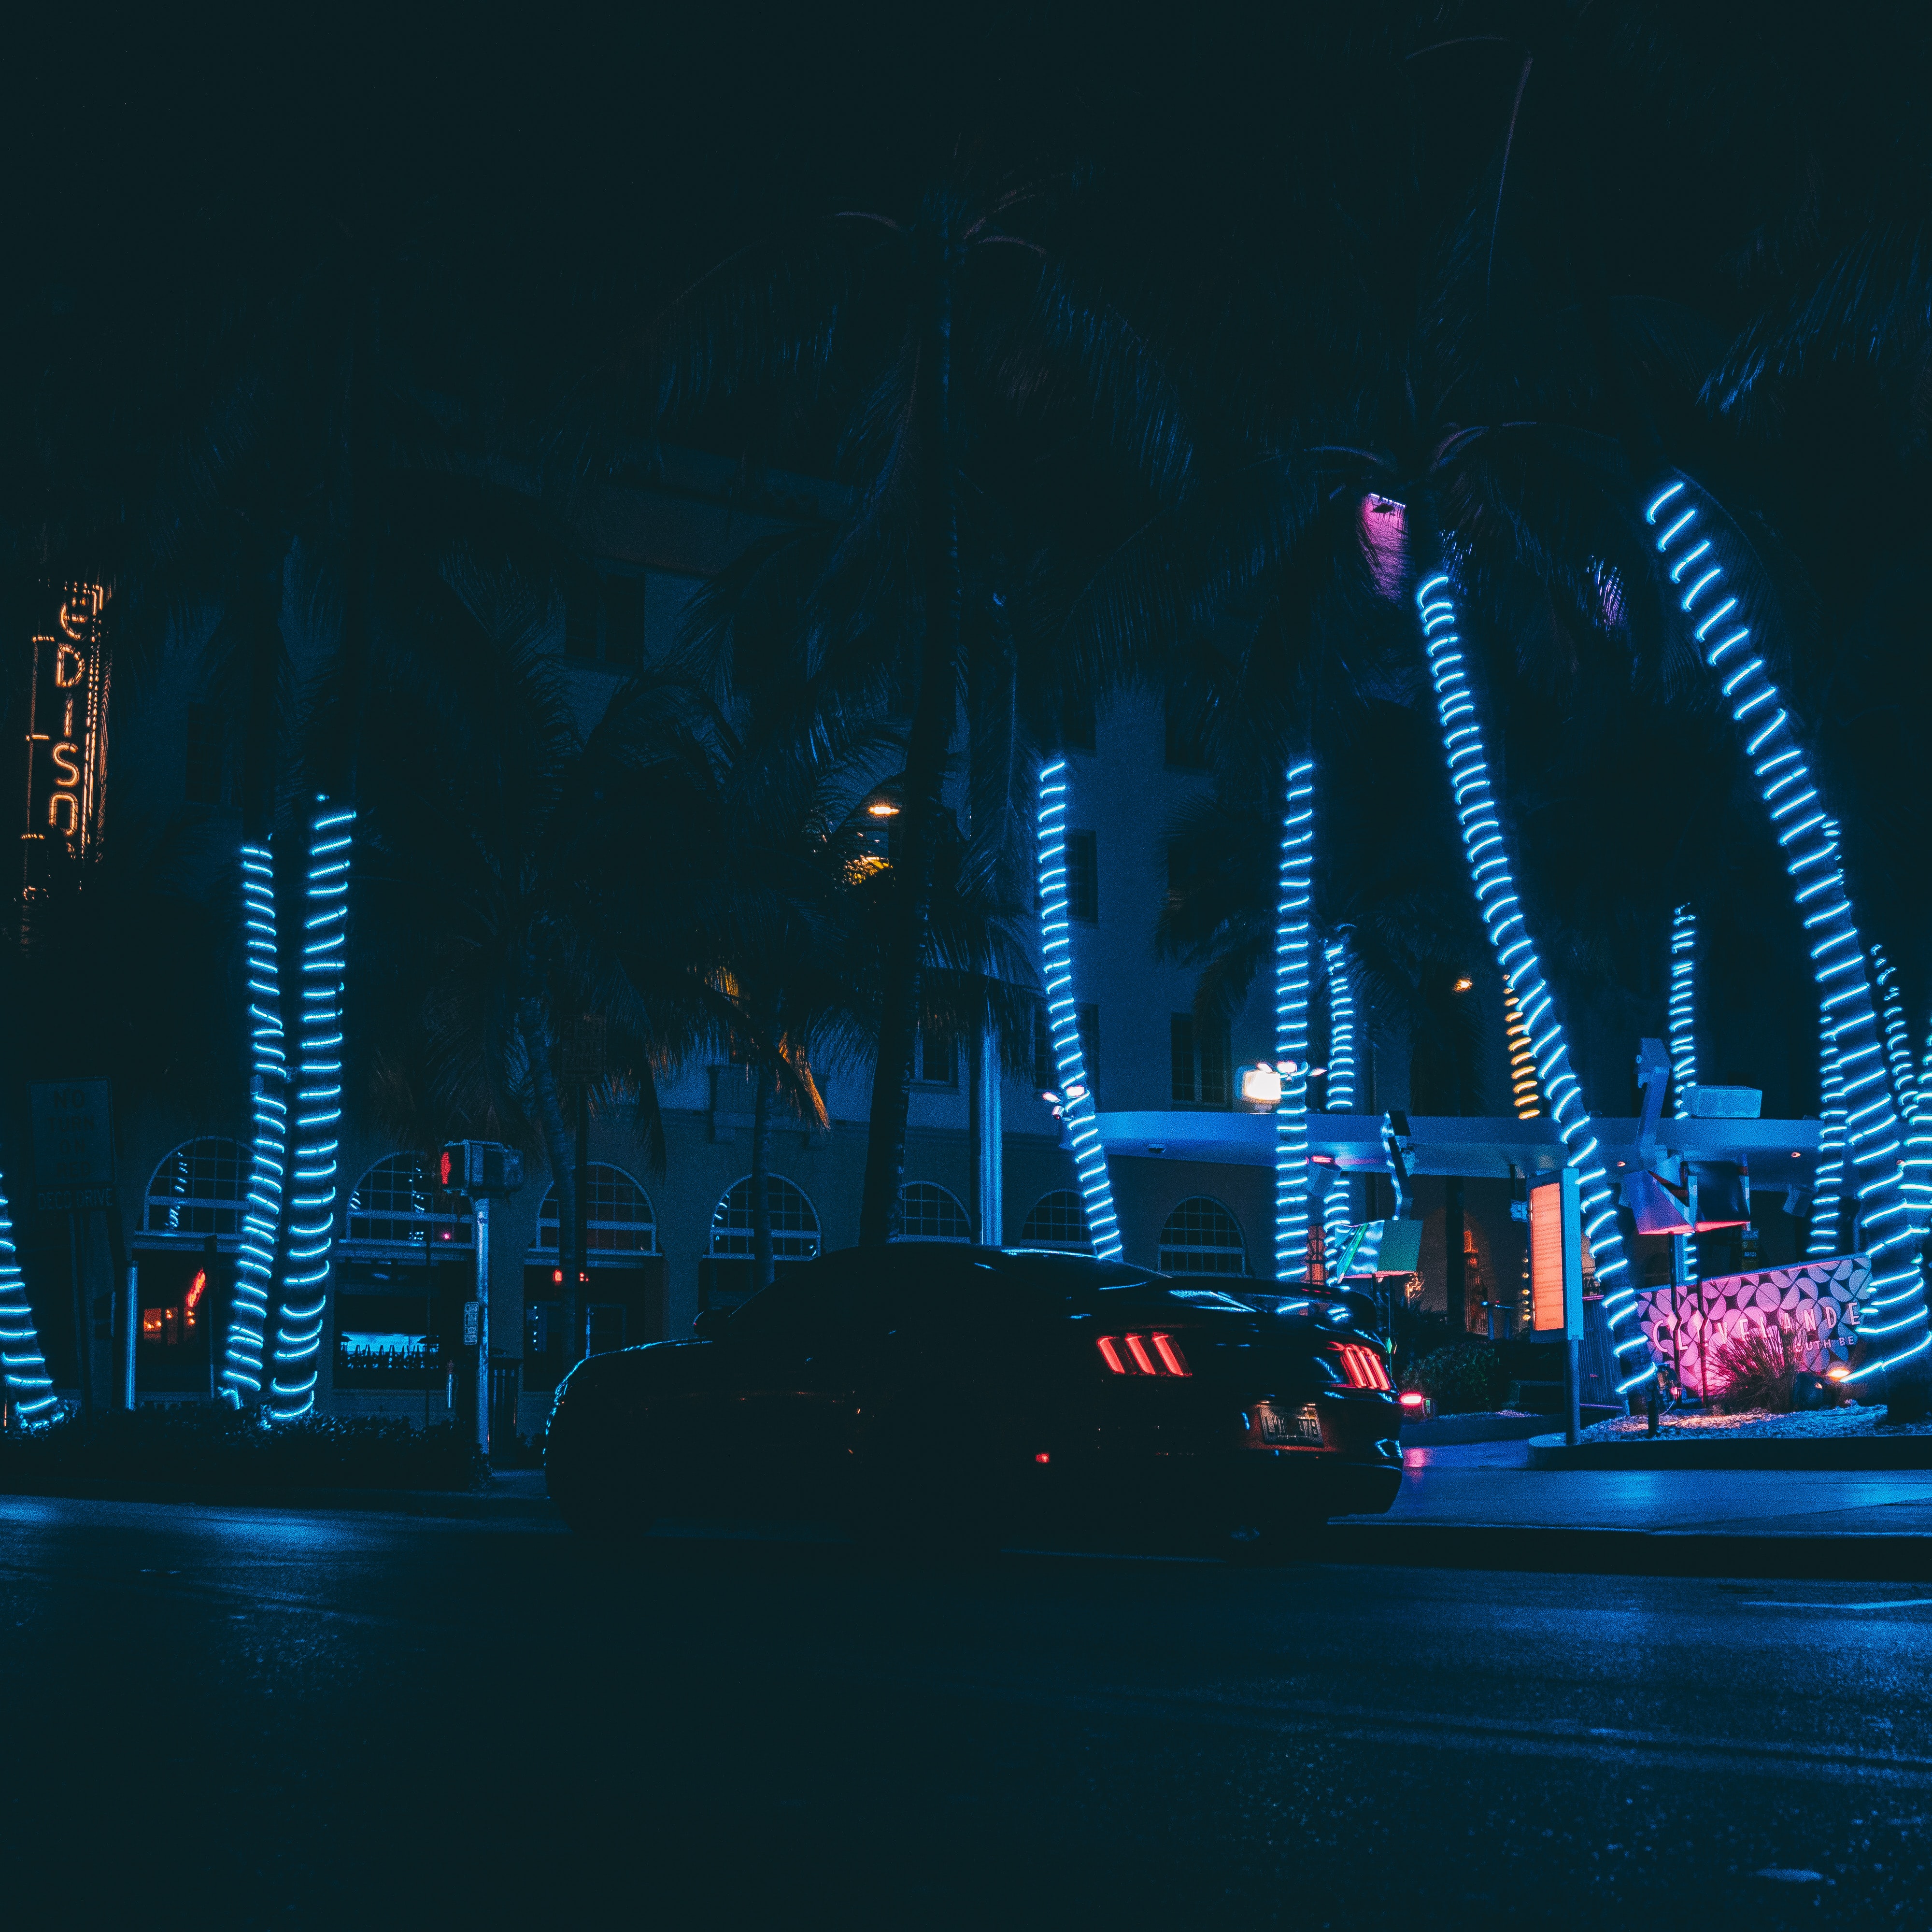 android car, sports car, neon, night city, sports, palms, cars